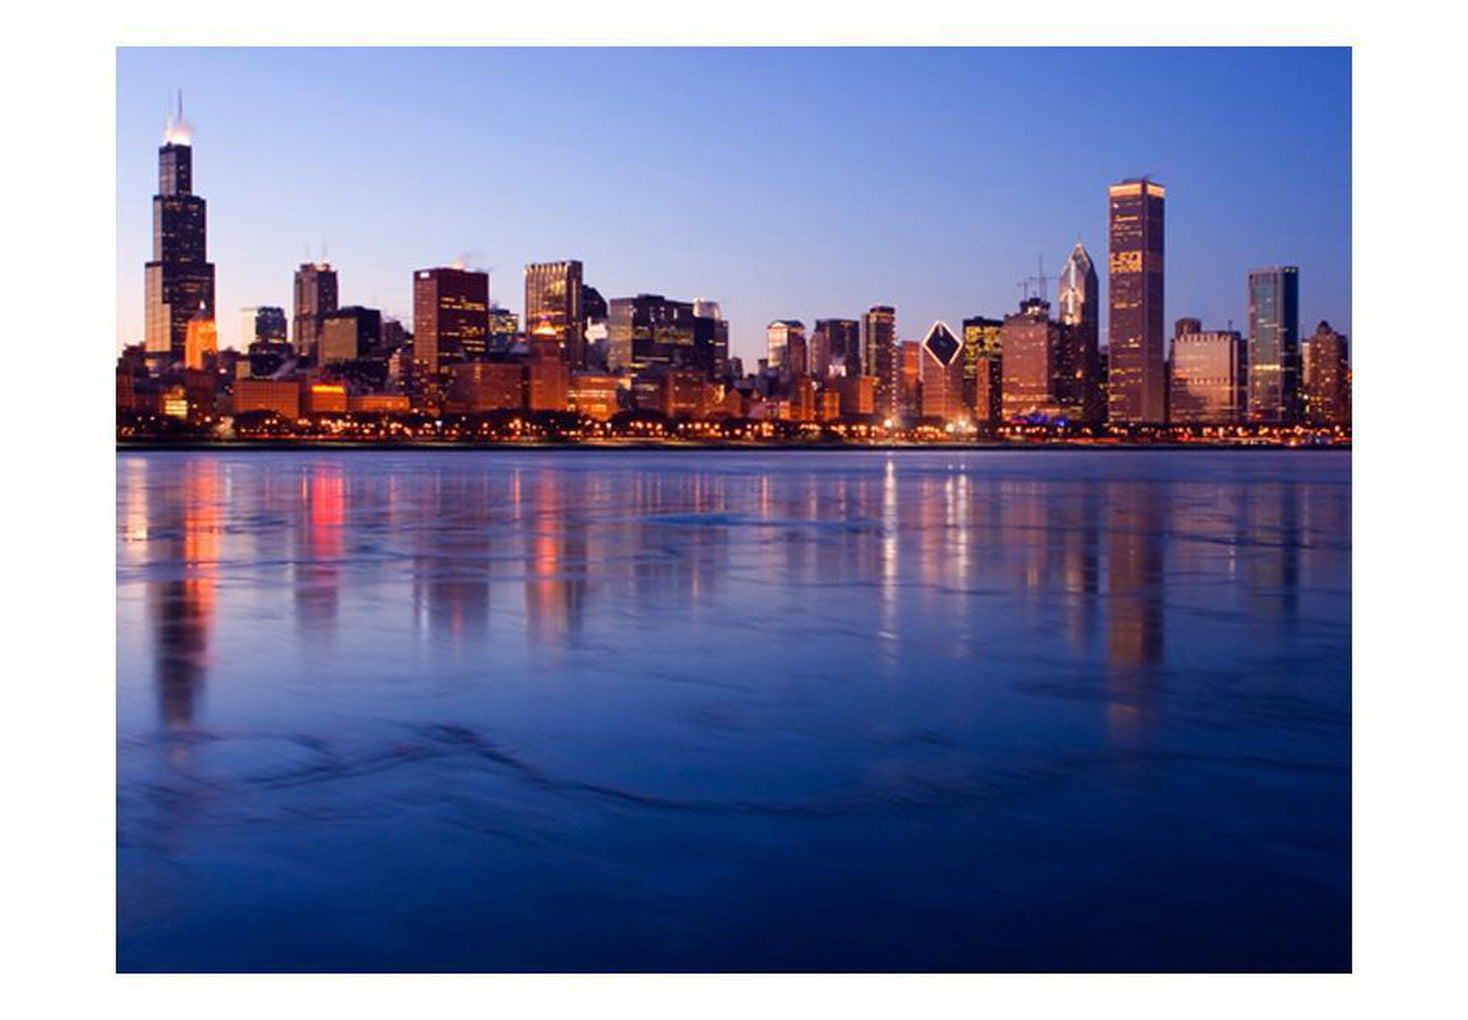 Wall mural - Icy Downtown Chicago-TipTopHomeDecor